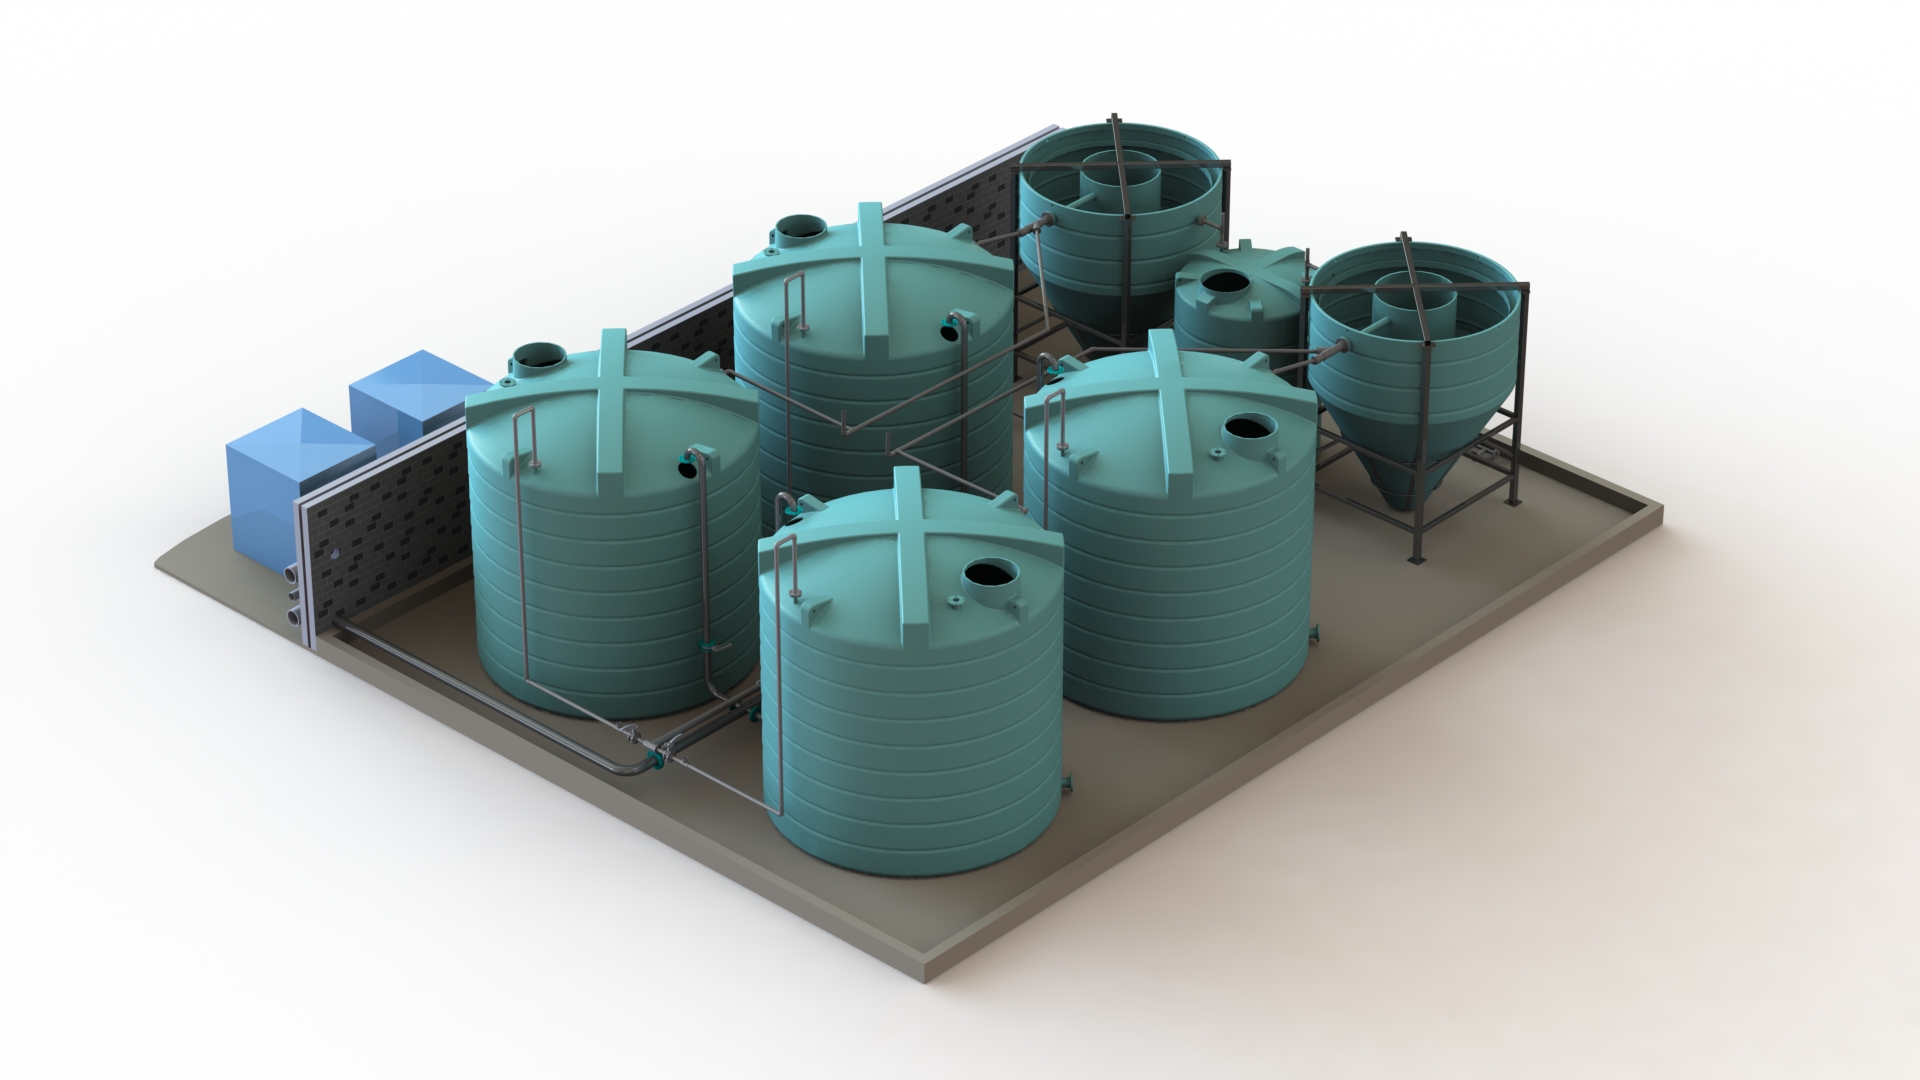 Waste treatment systems